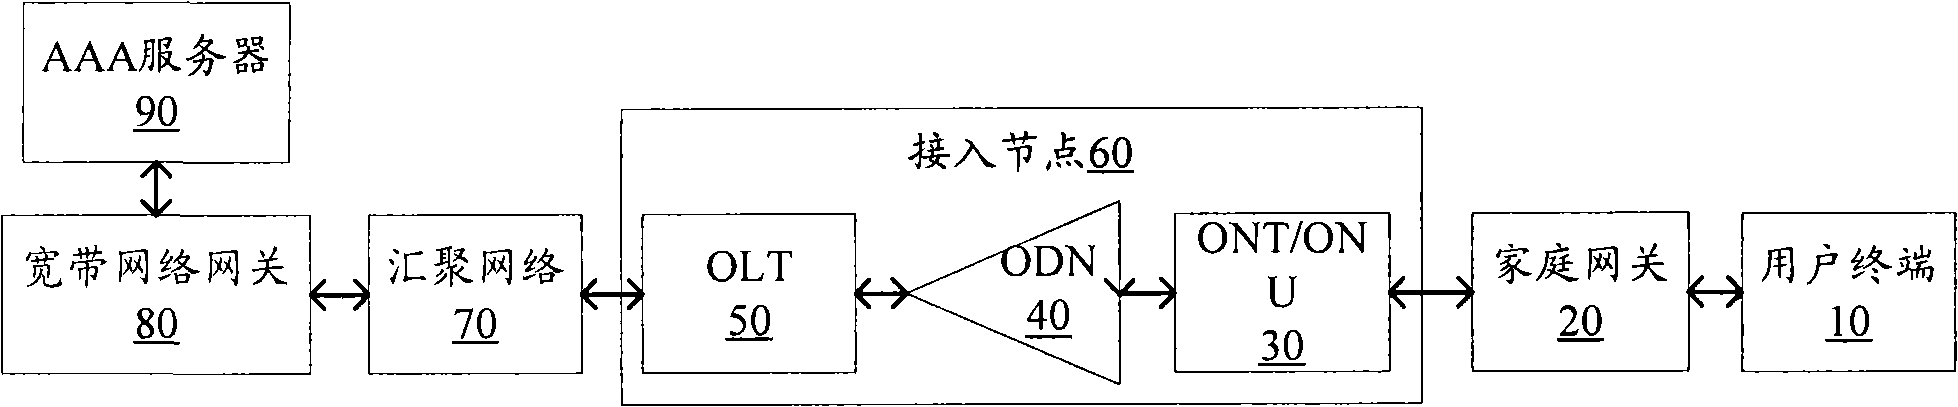 Wideband network and user management method based on GPON access